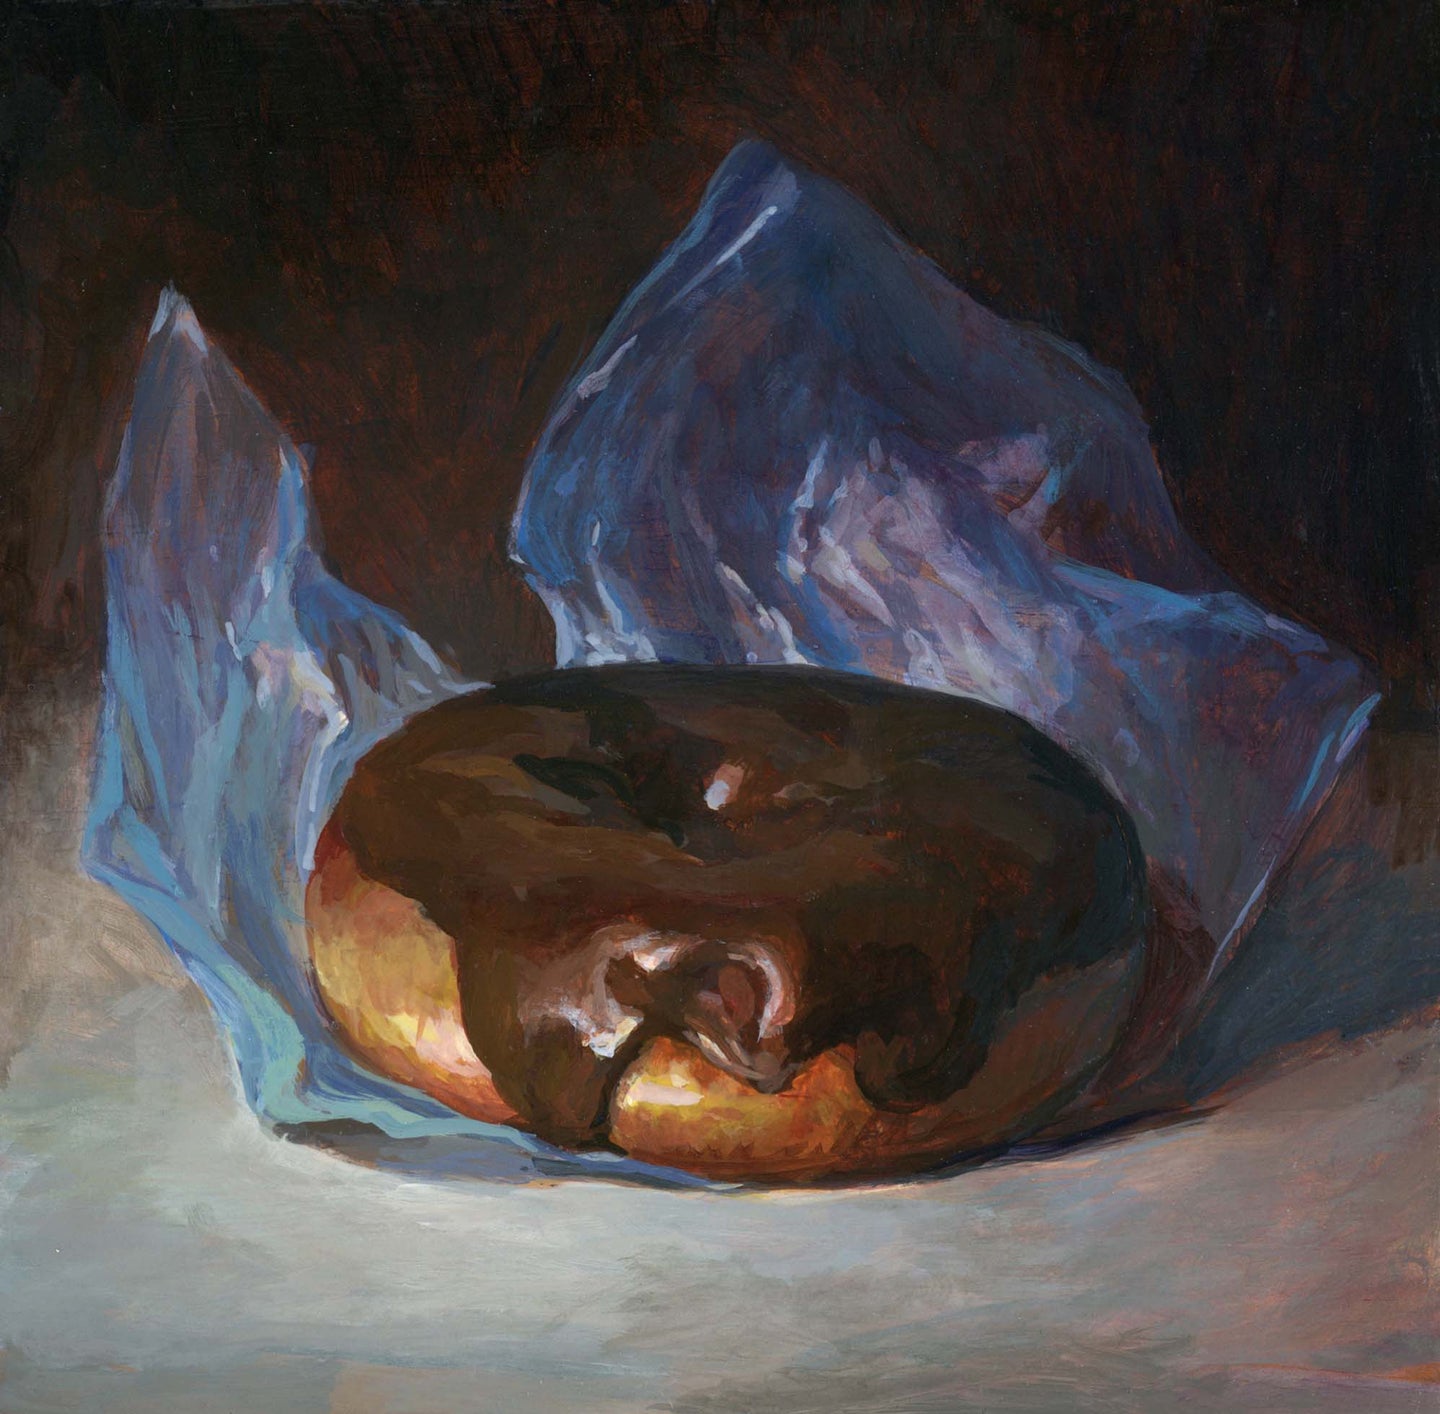 44. Chocolate Donut with Blue Plastic Wrap